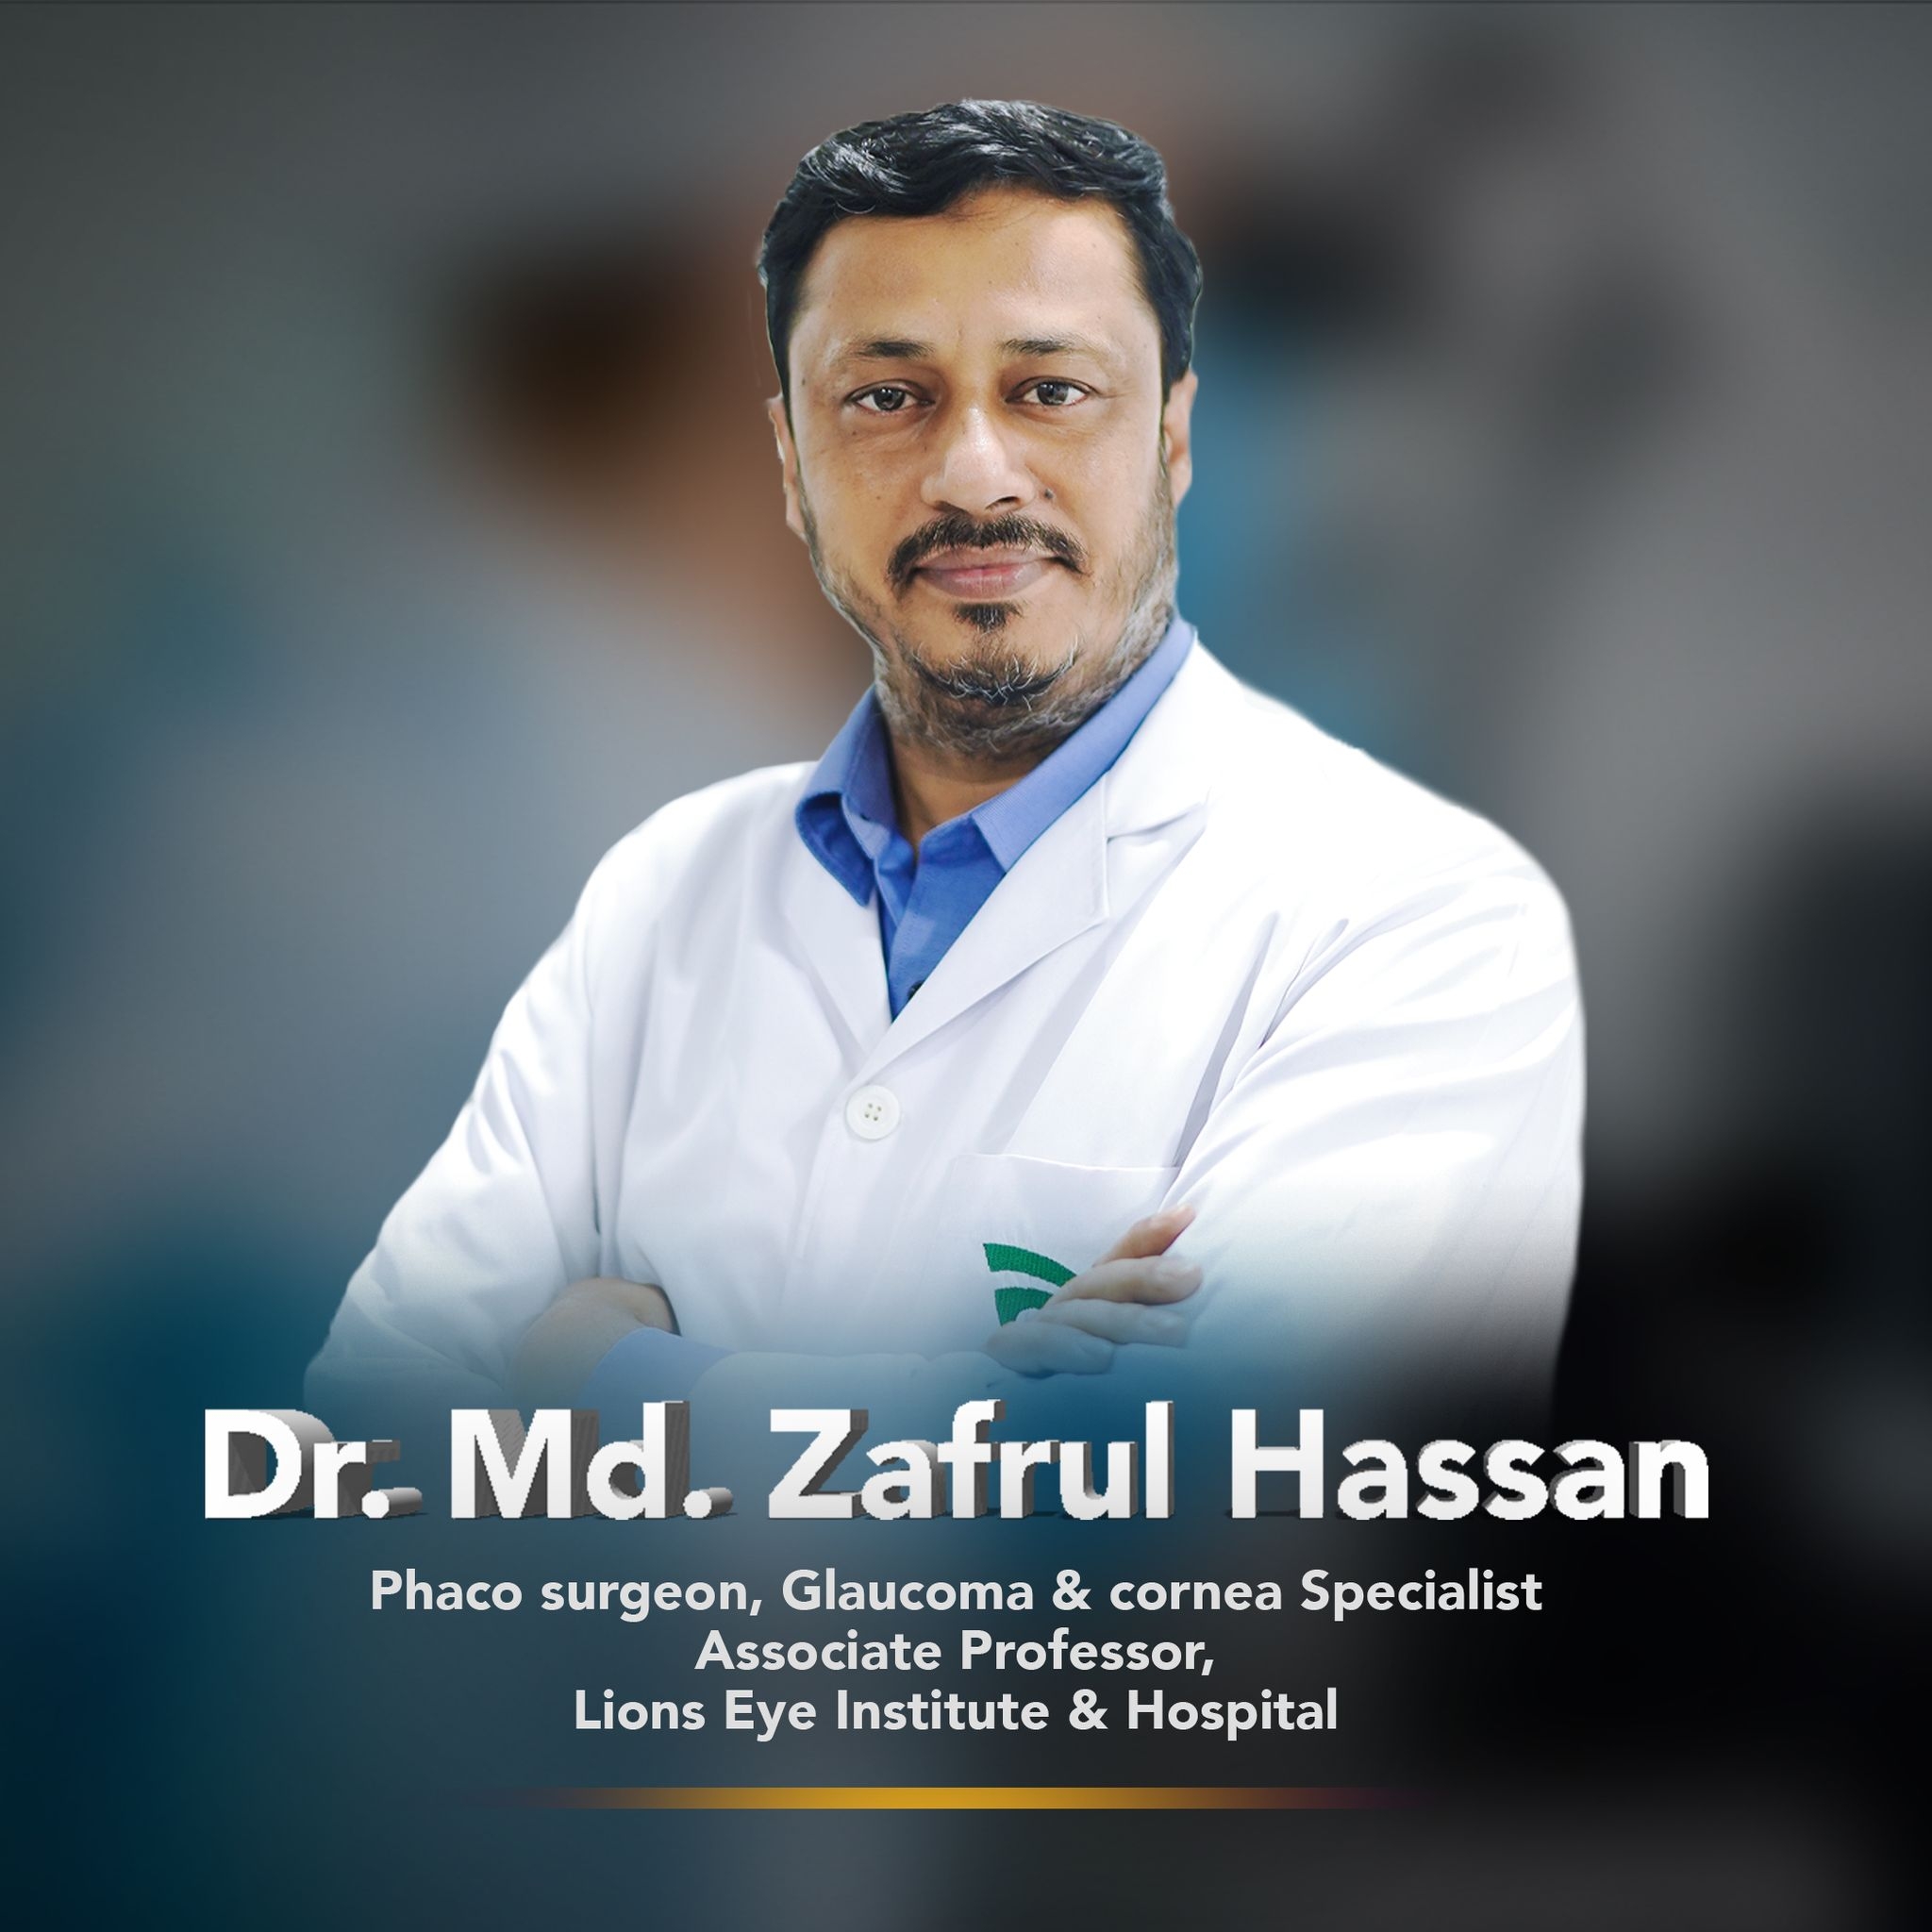 Dr. Mohammad Zafrul Hassan